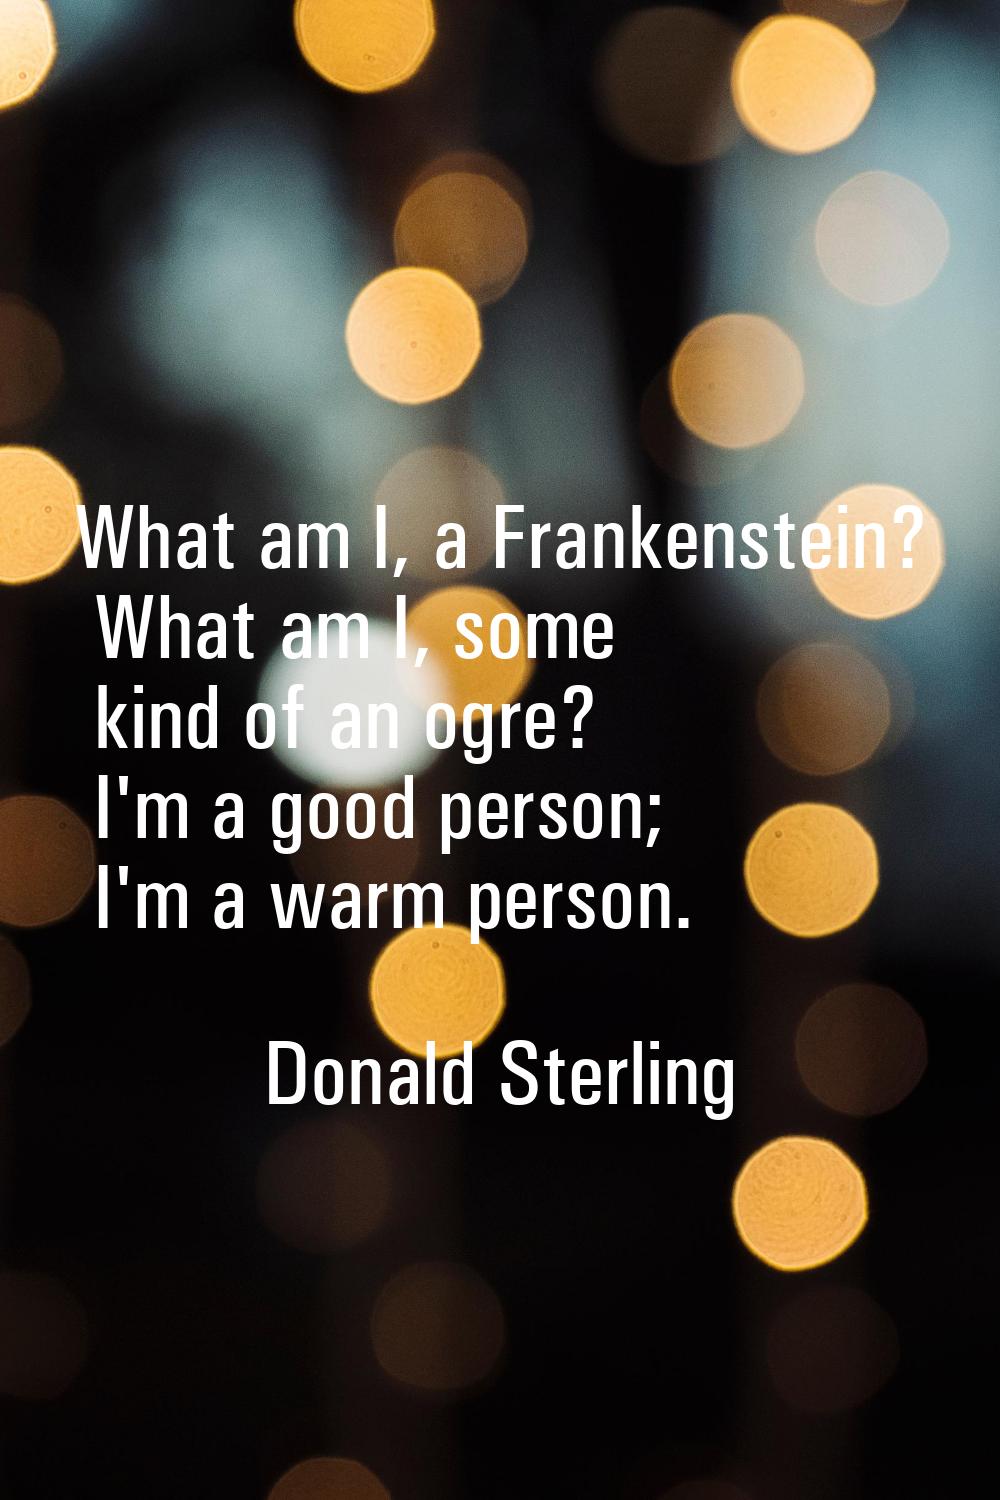 What am I, a Frankenstein? What am I, some kind of an ogre? I'm a good person; I'm a warm person.